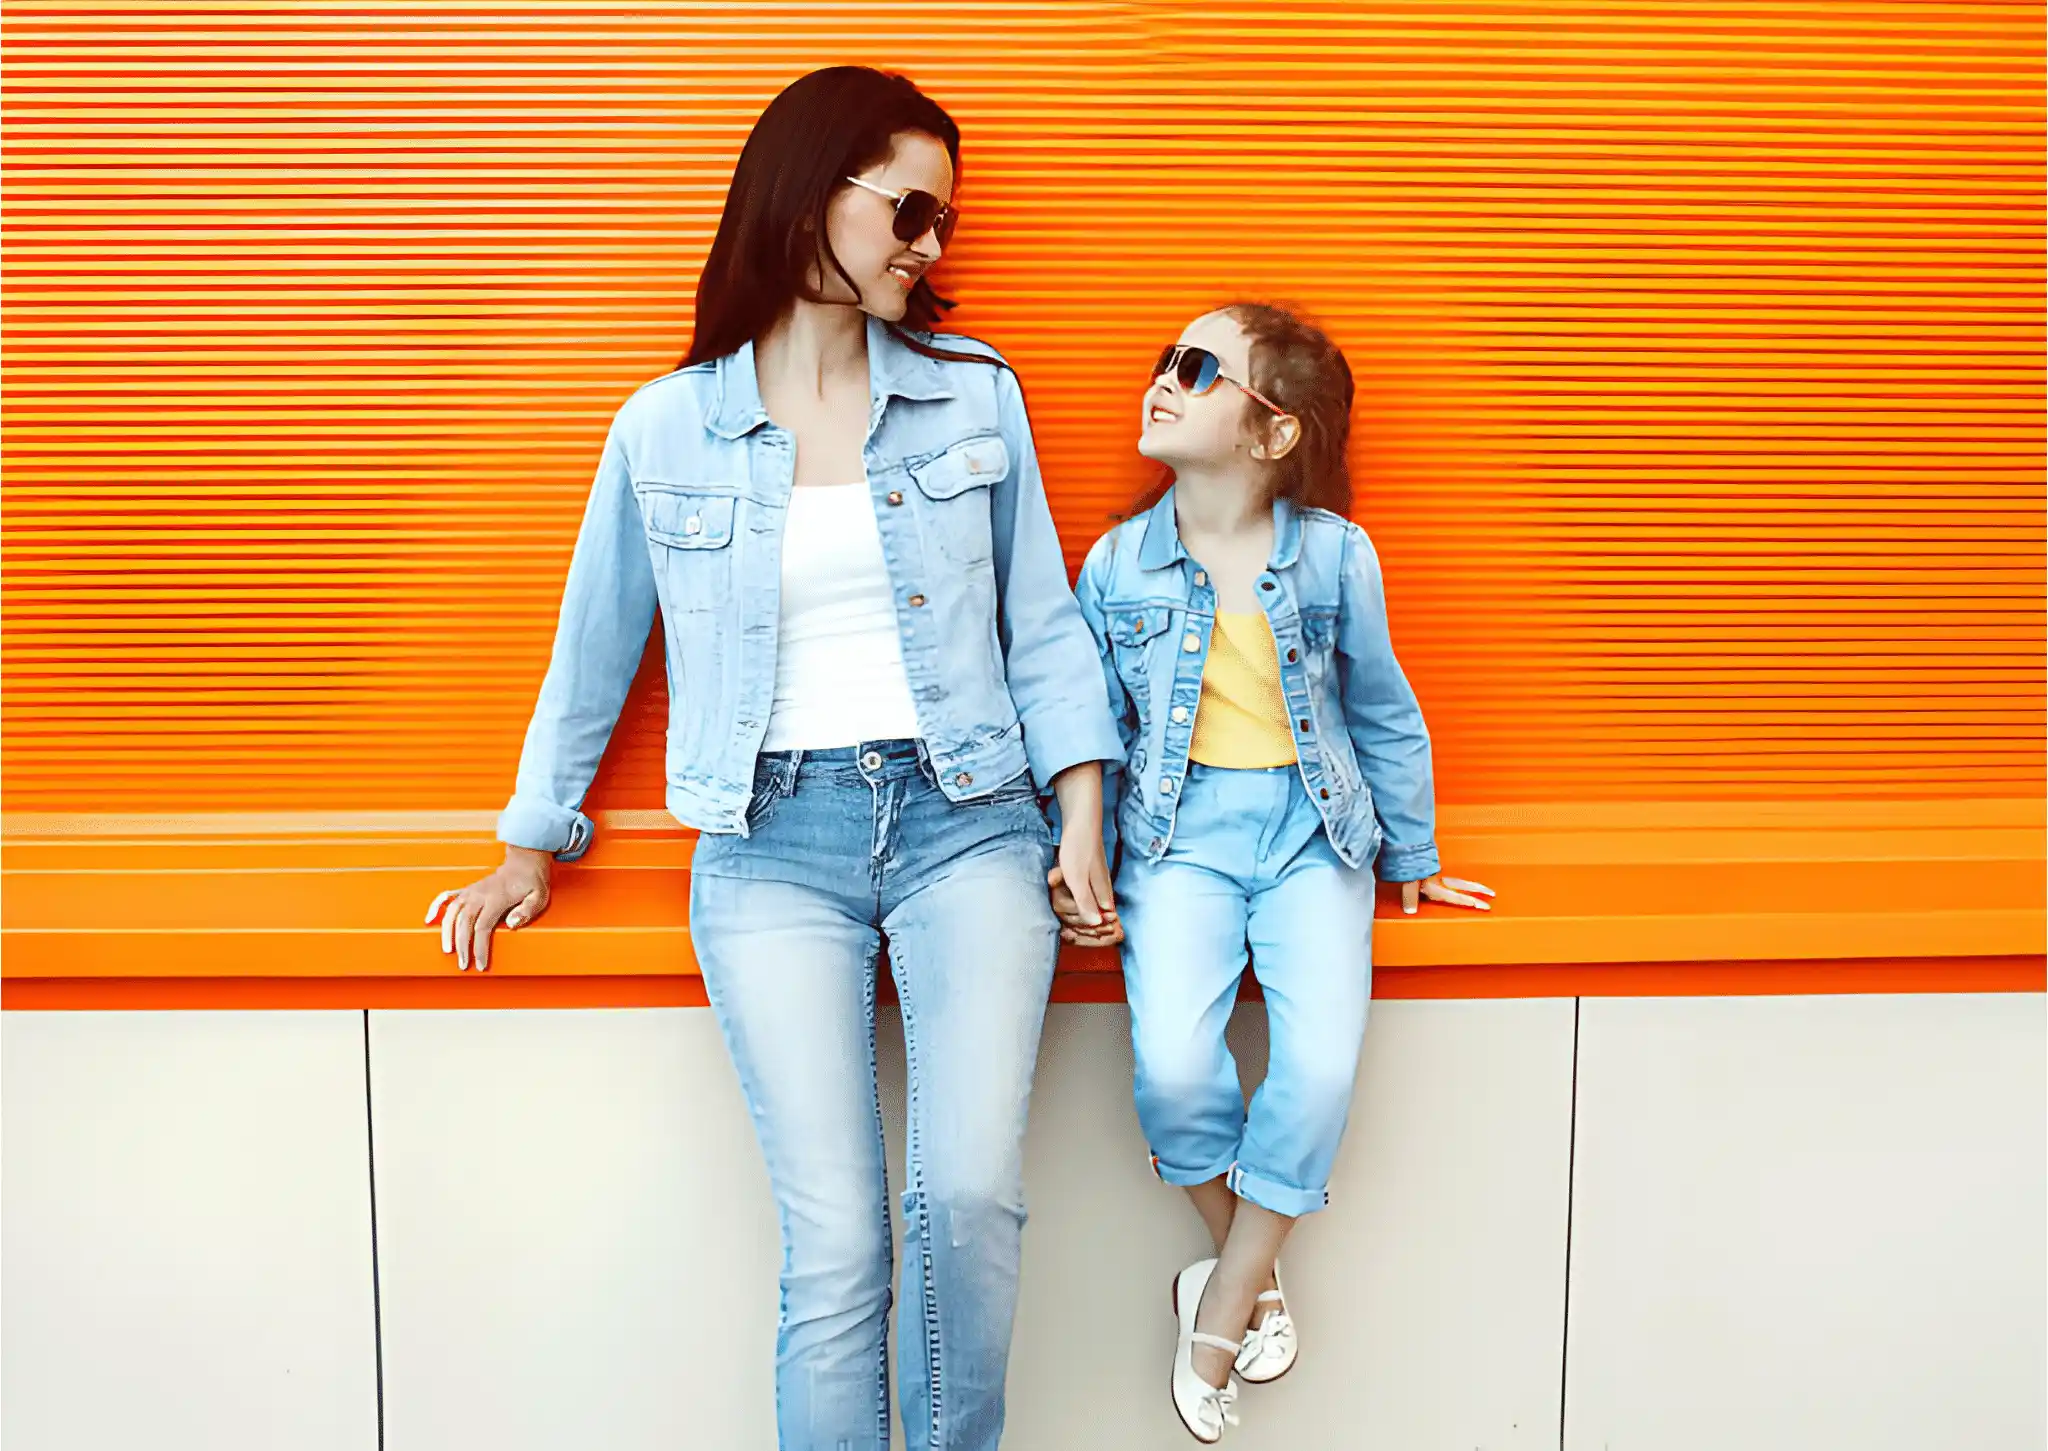 A little girl and mother dressed in denim.